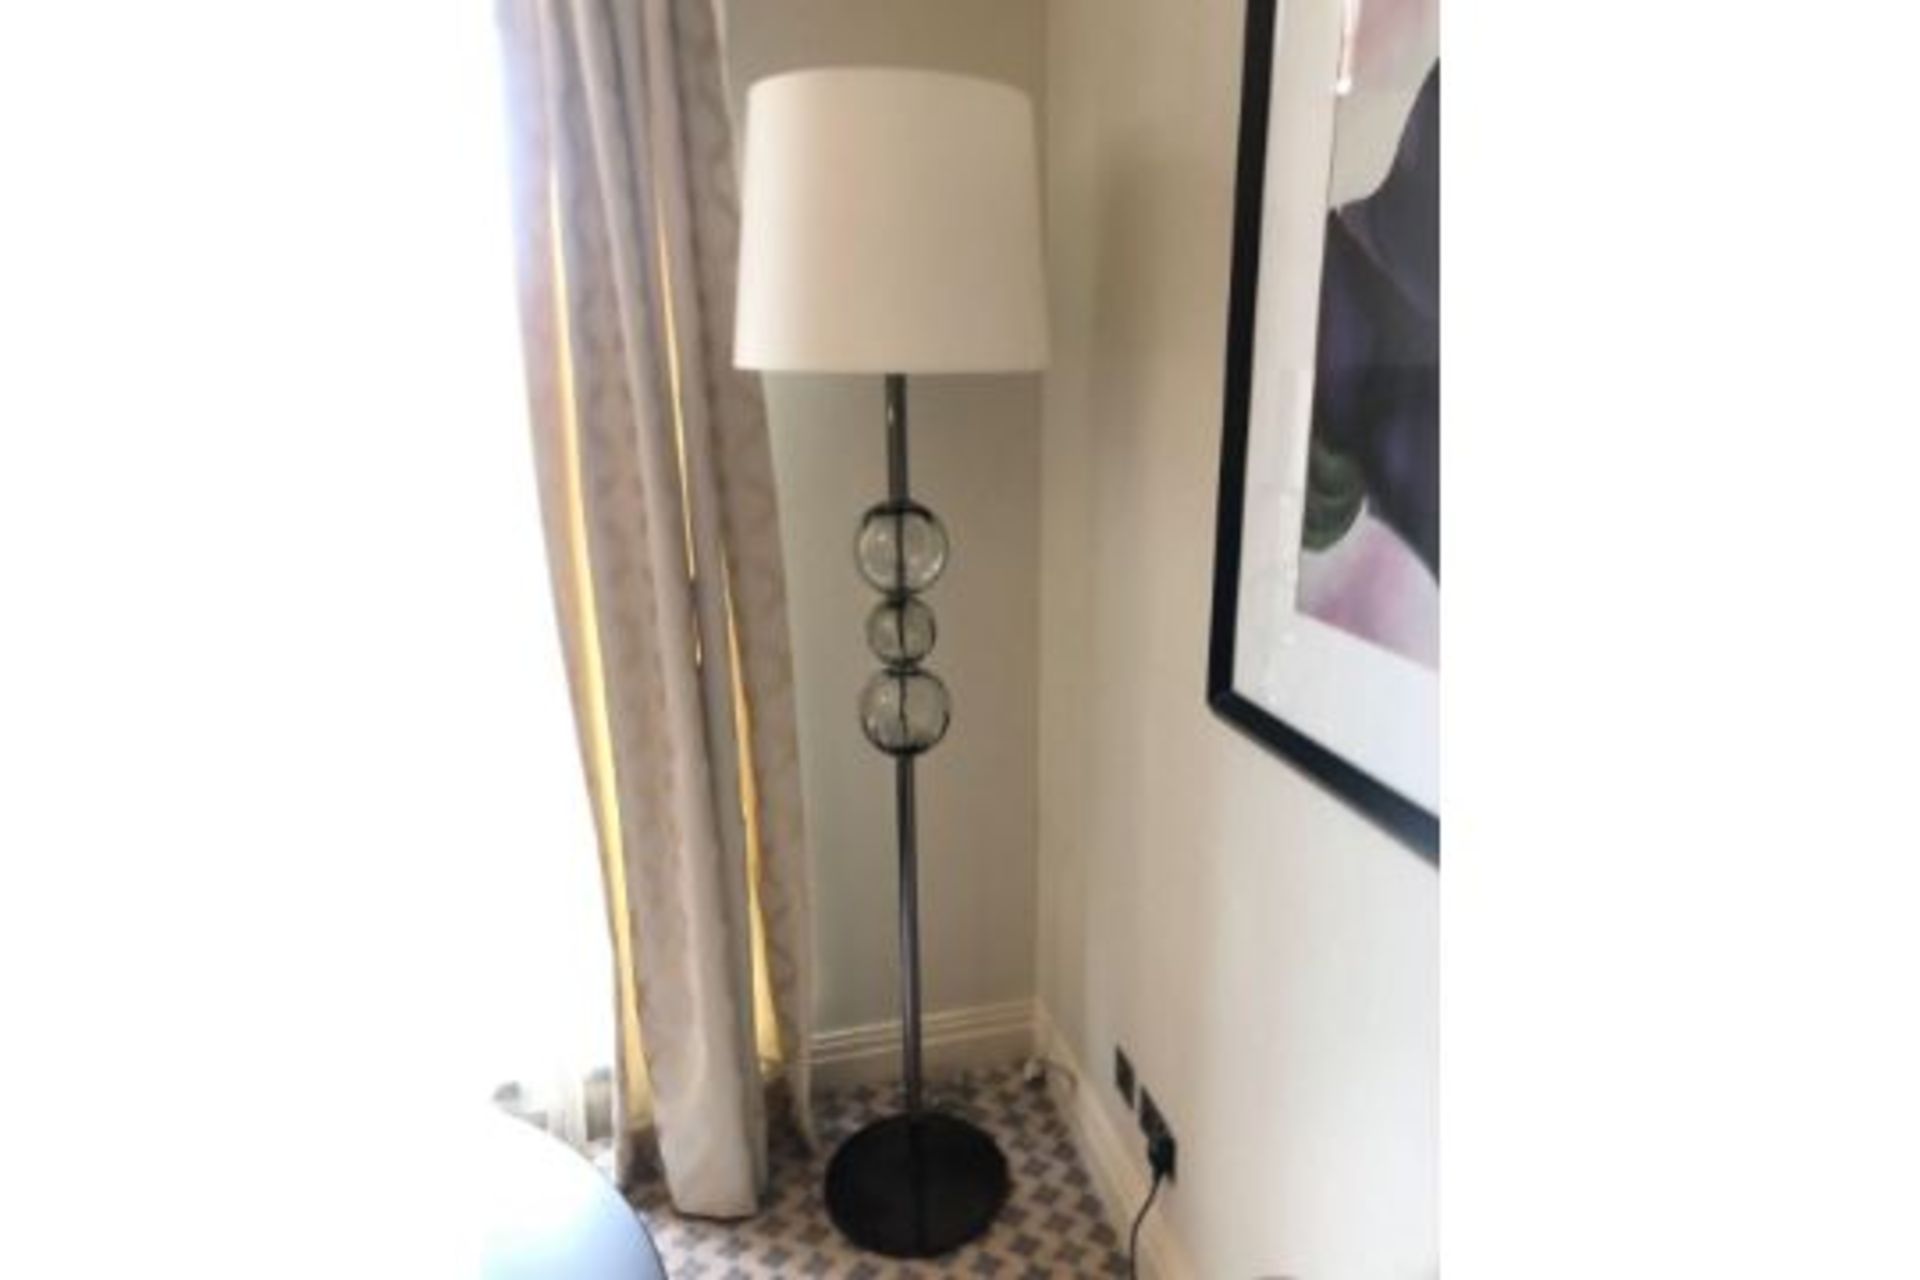 A Pair of Barovier Toso 5577 Marta Floor Lamp Spheres Featuring A Bark Effect Texture Are The